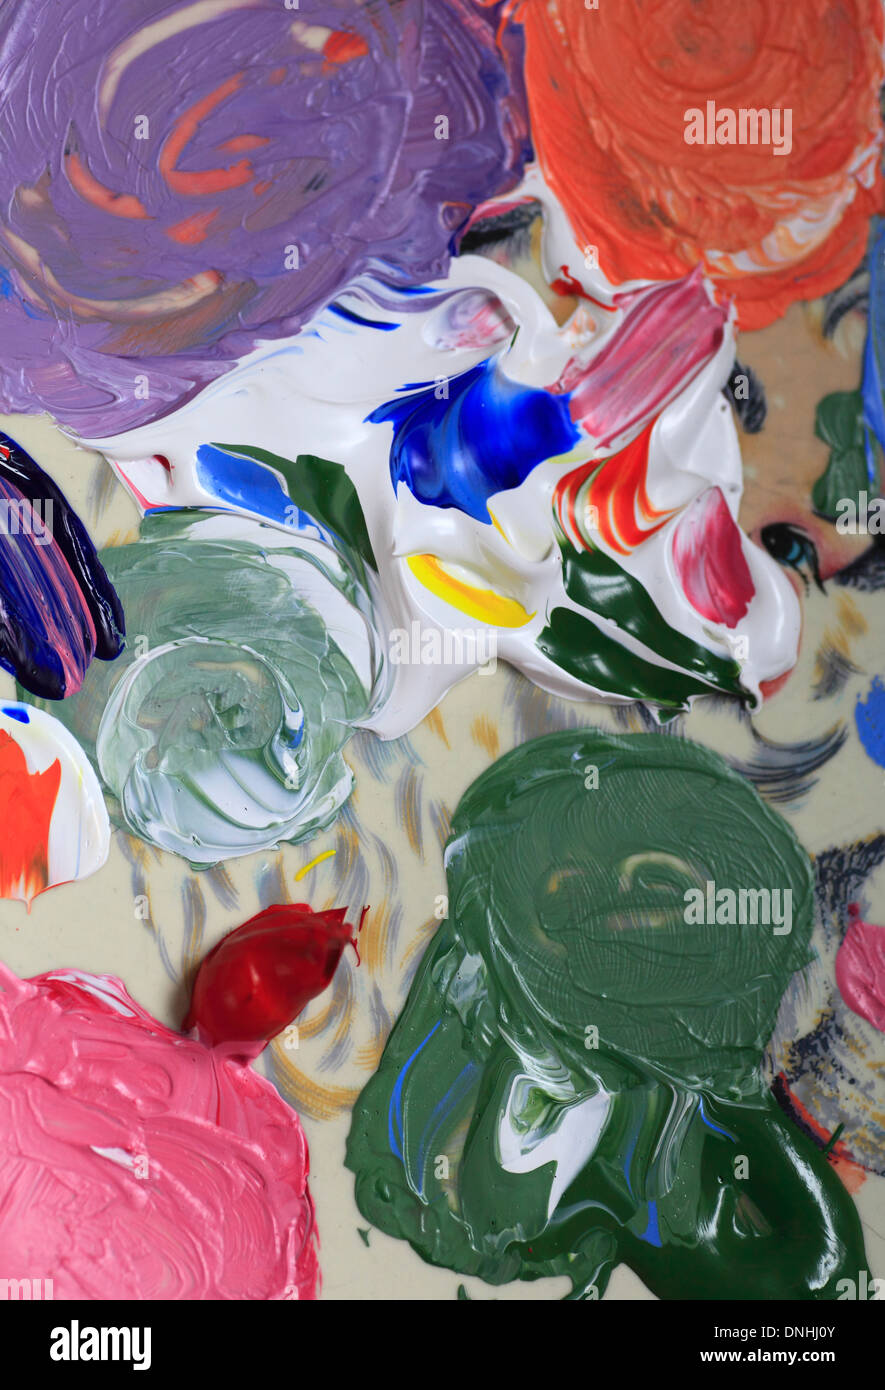 Paints on a palette during artwork. Stock Photo